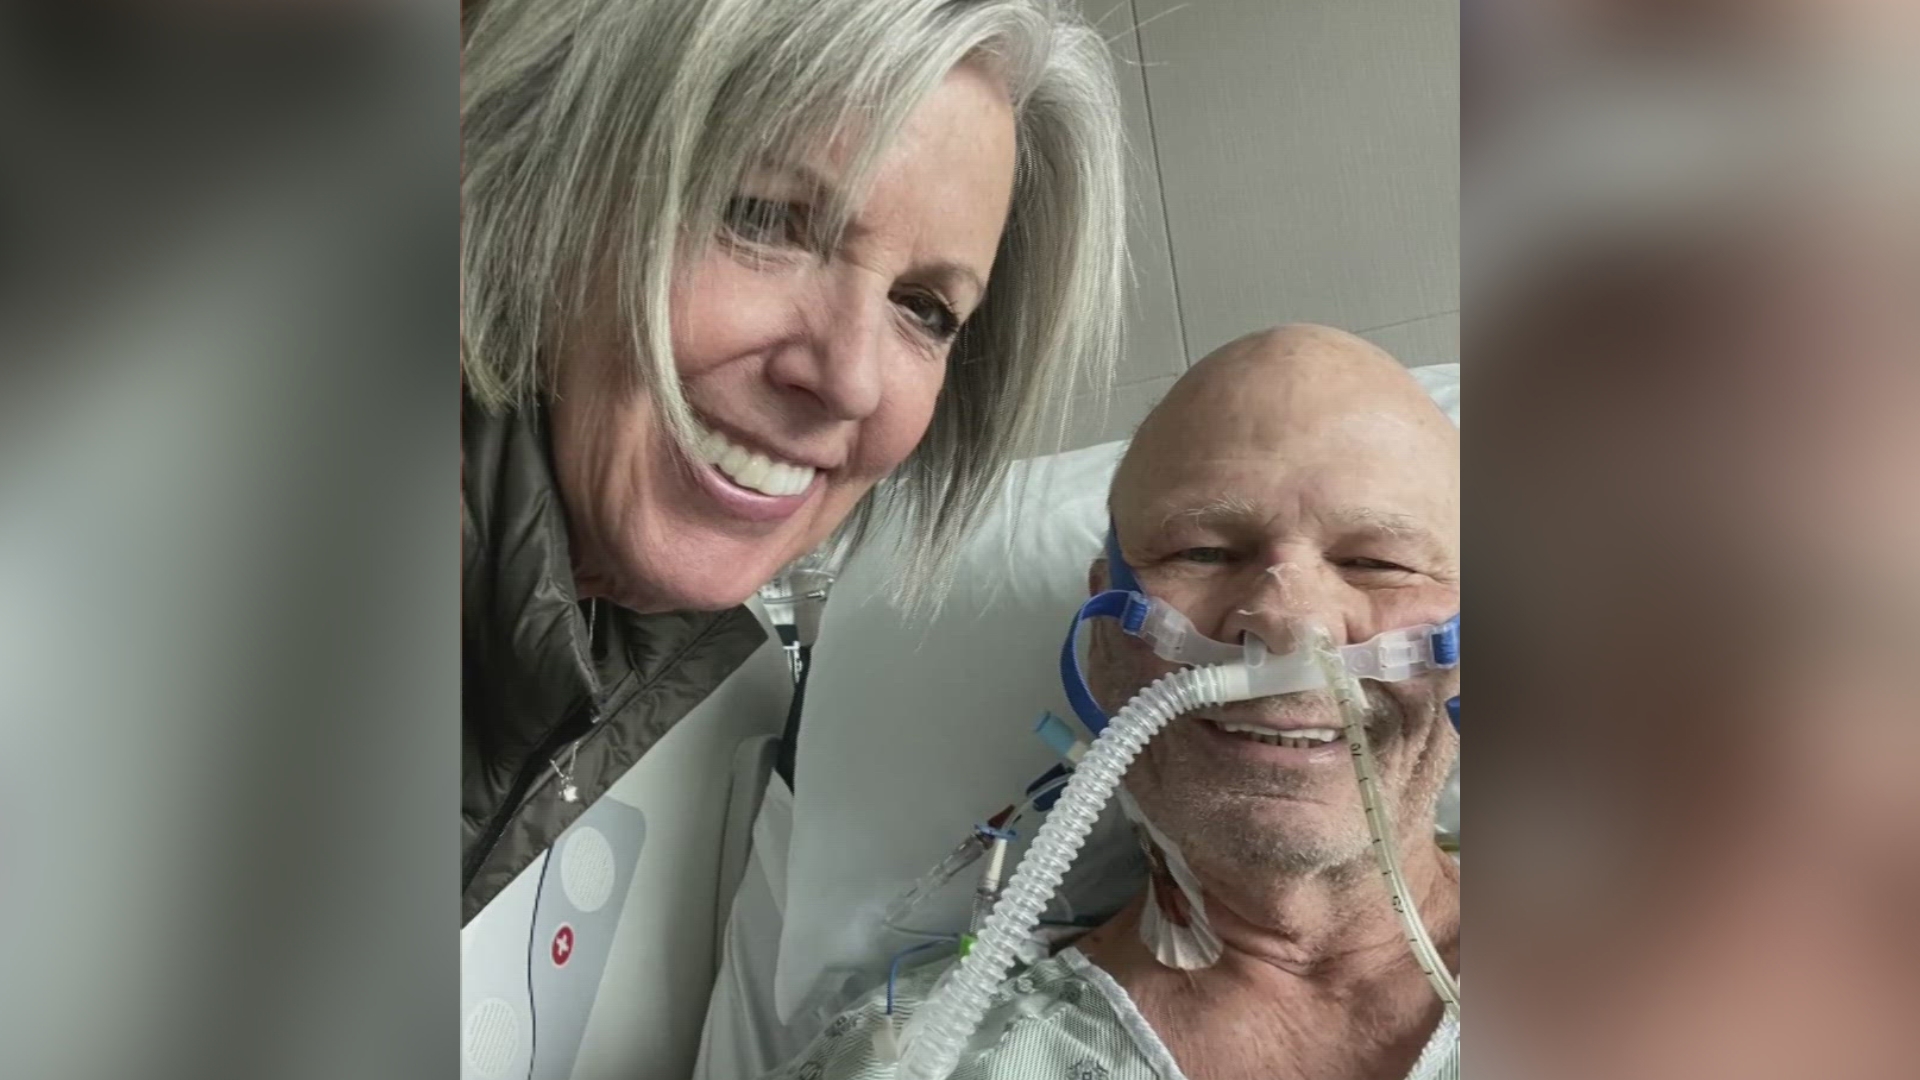 Barrie Rhodes, 73, suffered a ruptured abdominal aortic aneurysm. But he didn't know until doctors at ProMedica Toledo Hospital saw the signs and saved his life.